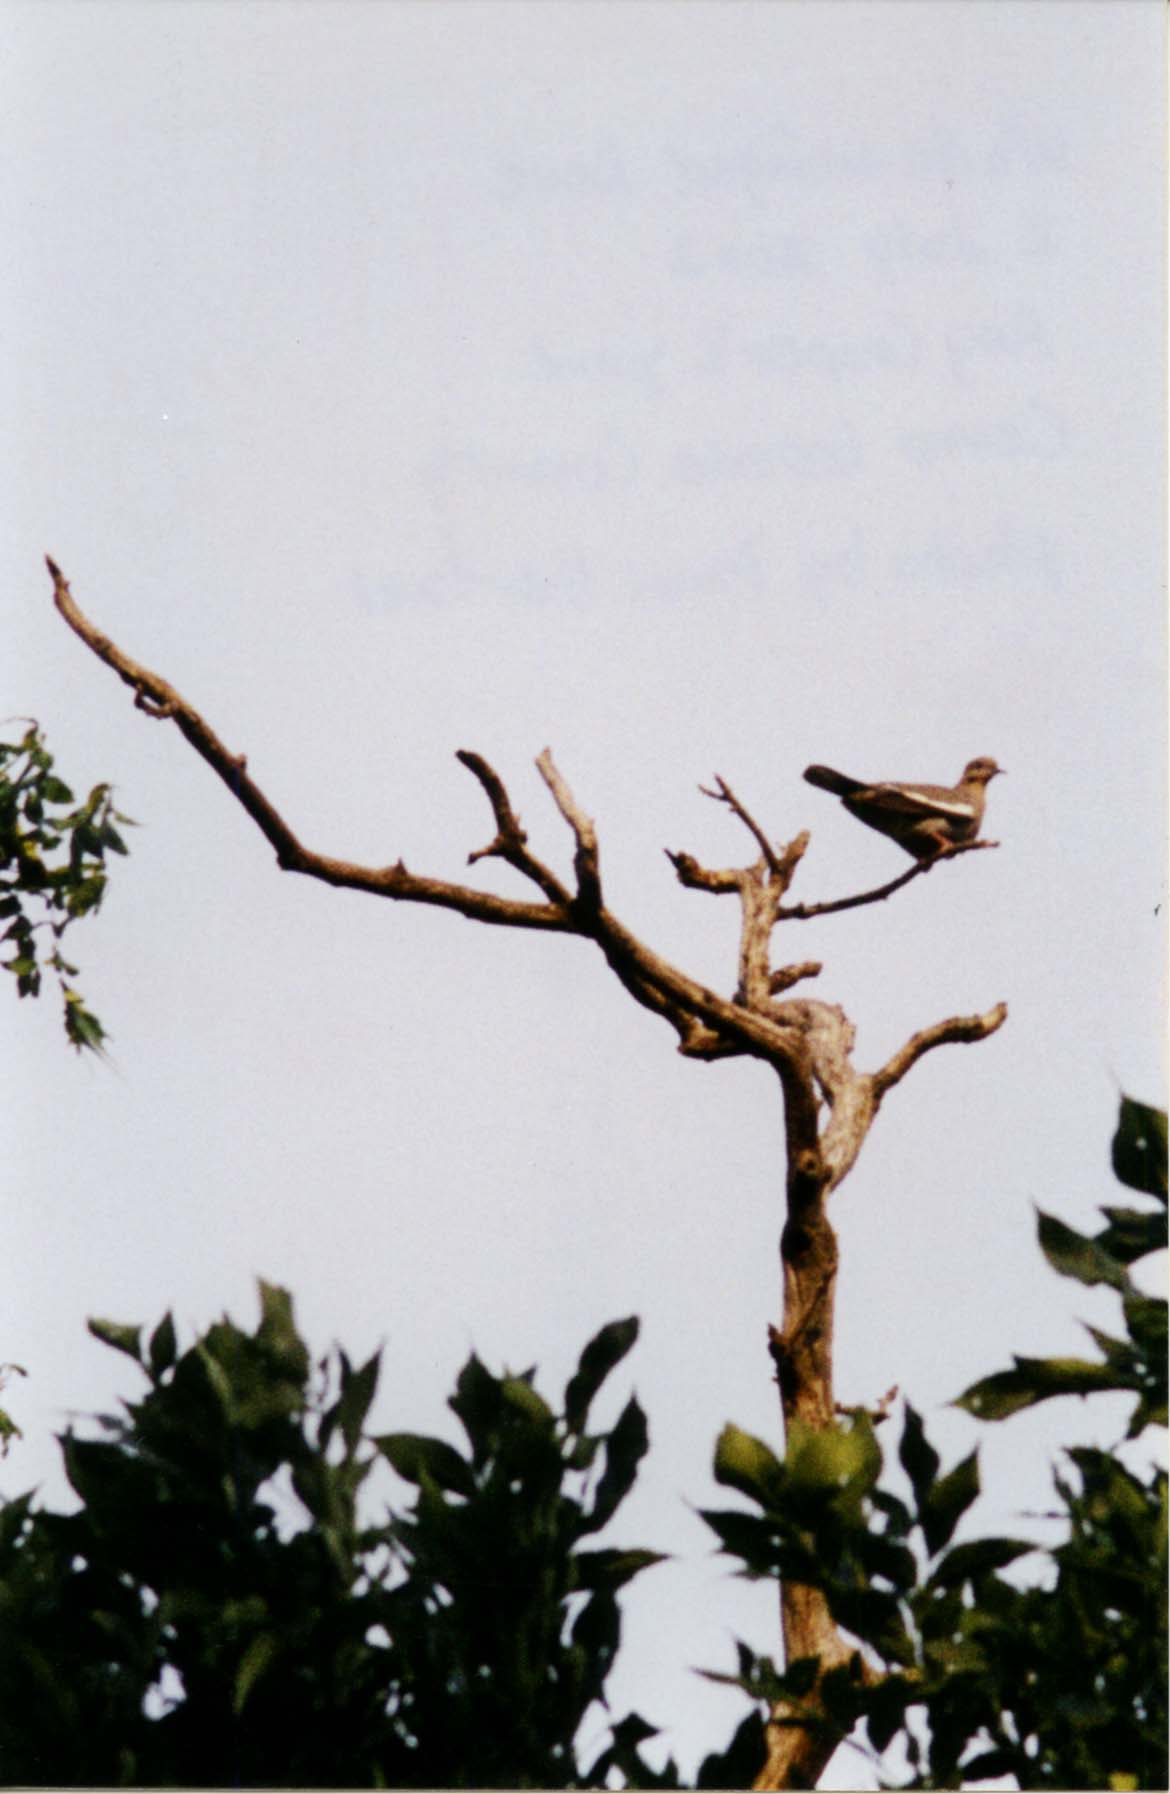 Photograph of a White-winged Dove perching on a tree branch